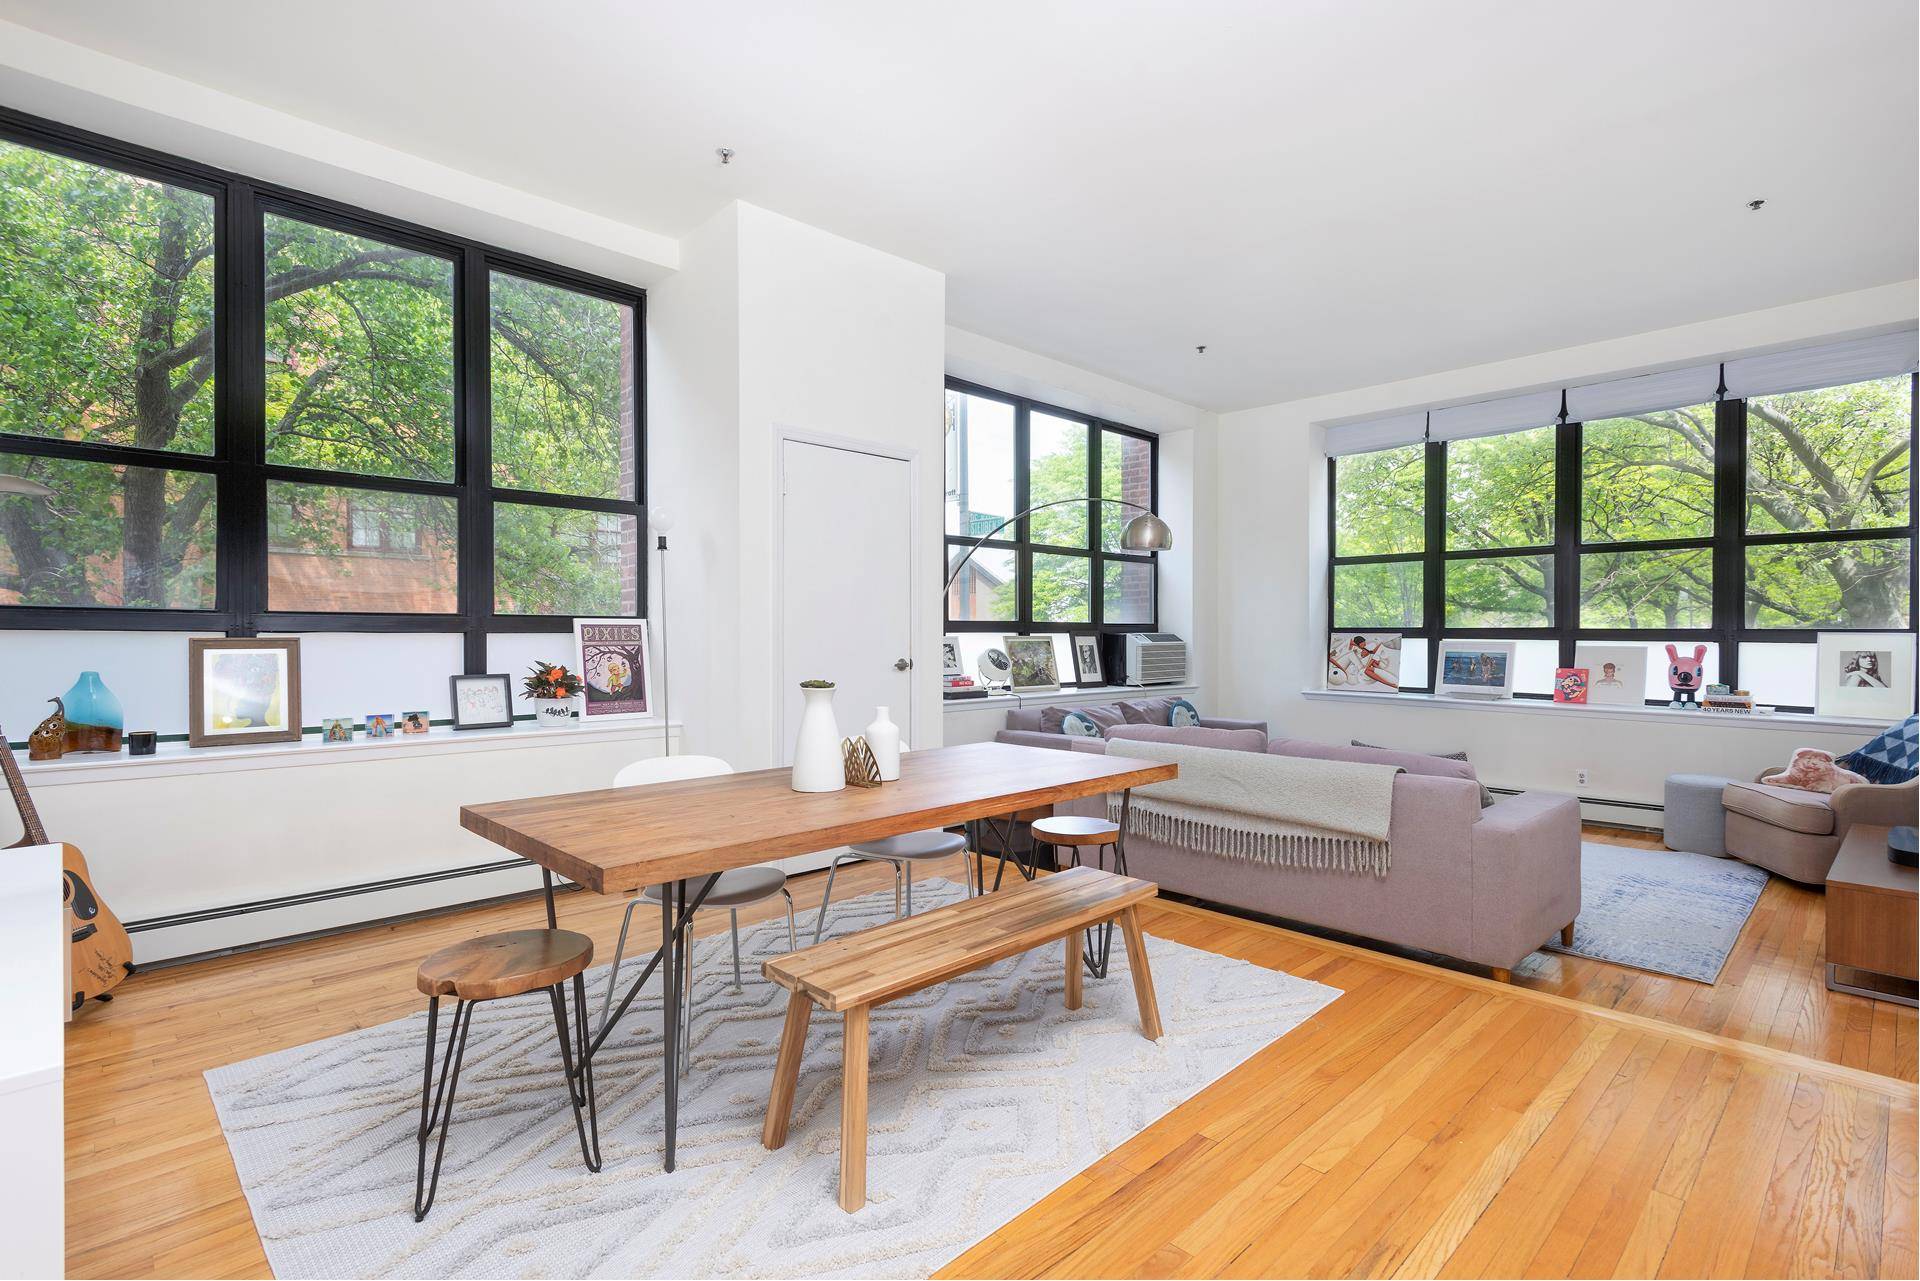 Glorious light fills your home from enormous windows in this spacious and renovated 2 Bedroom, 2 Bath Loft like Coop at the Clinton Mews.